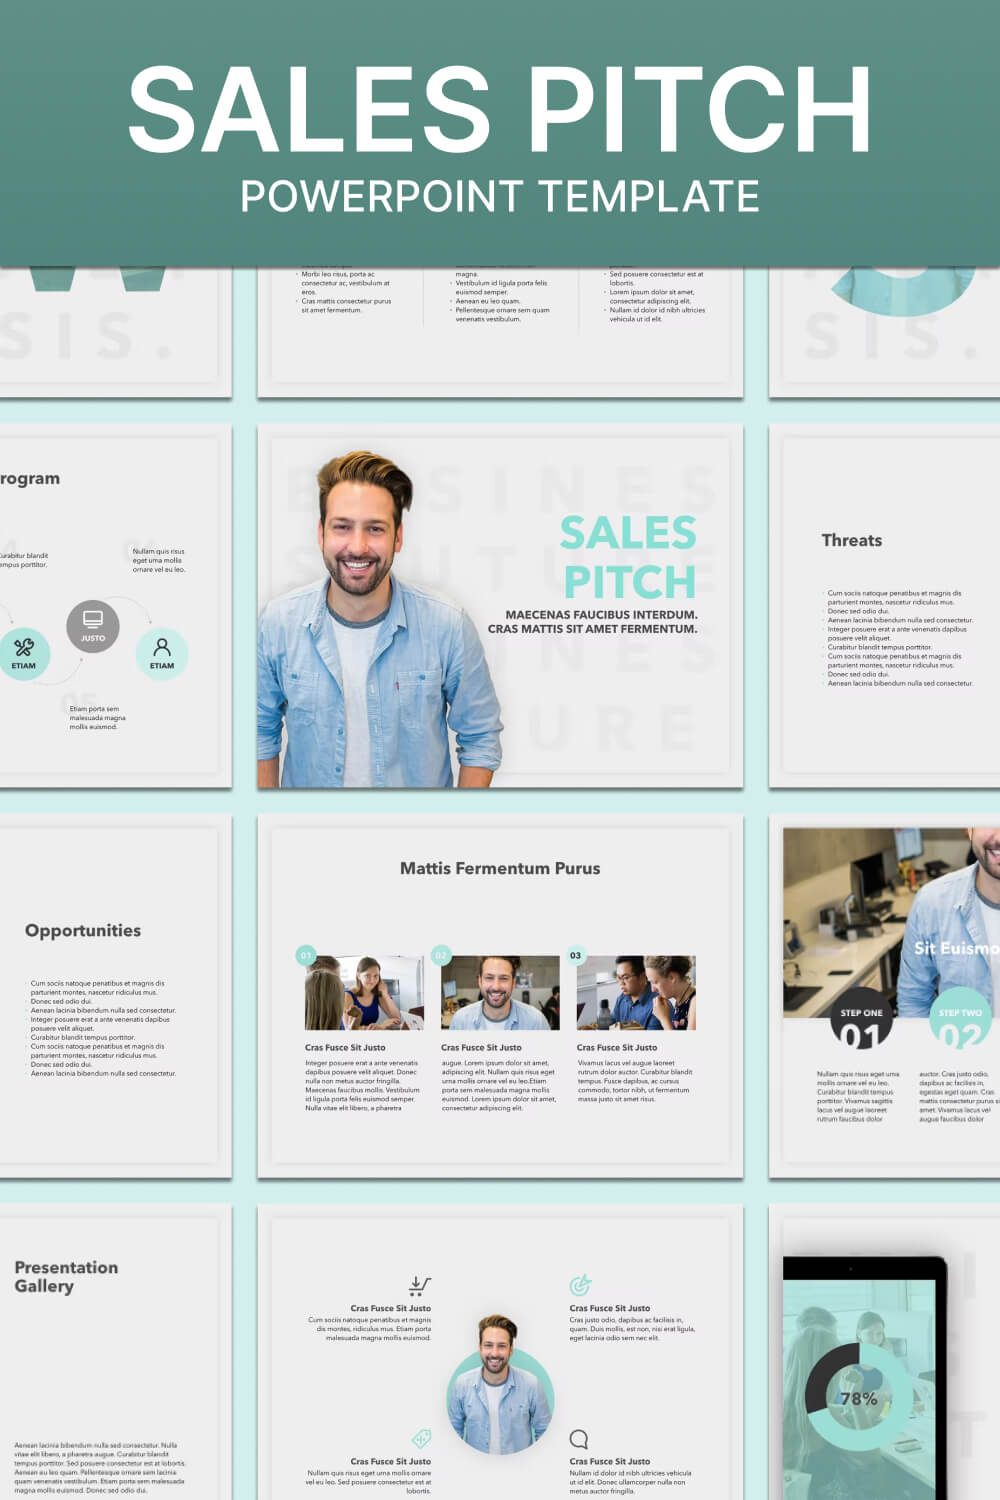 Six step program of Sales Pitch PowerPoint Template.